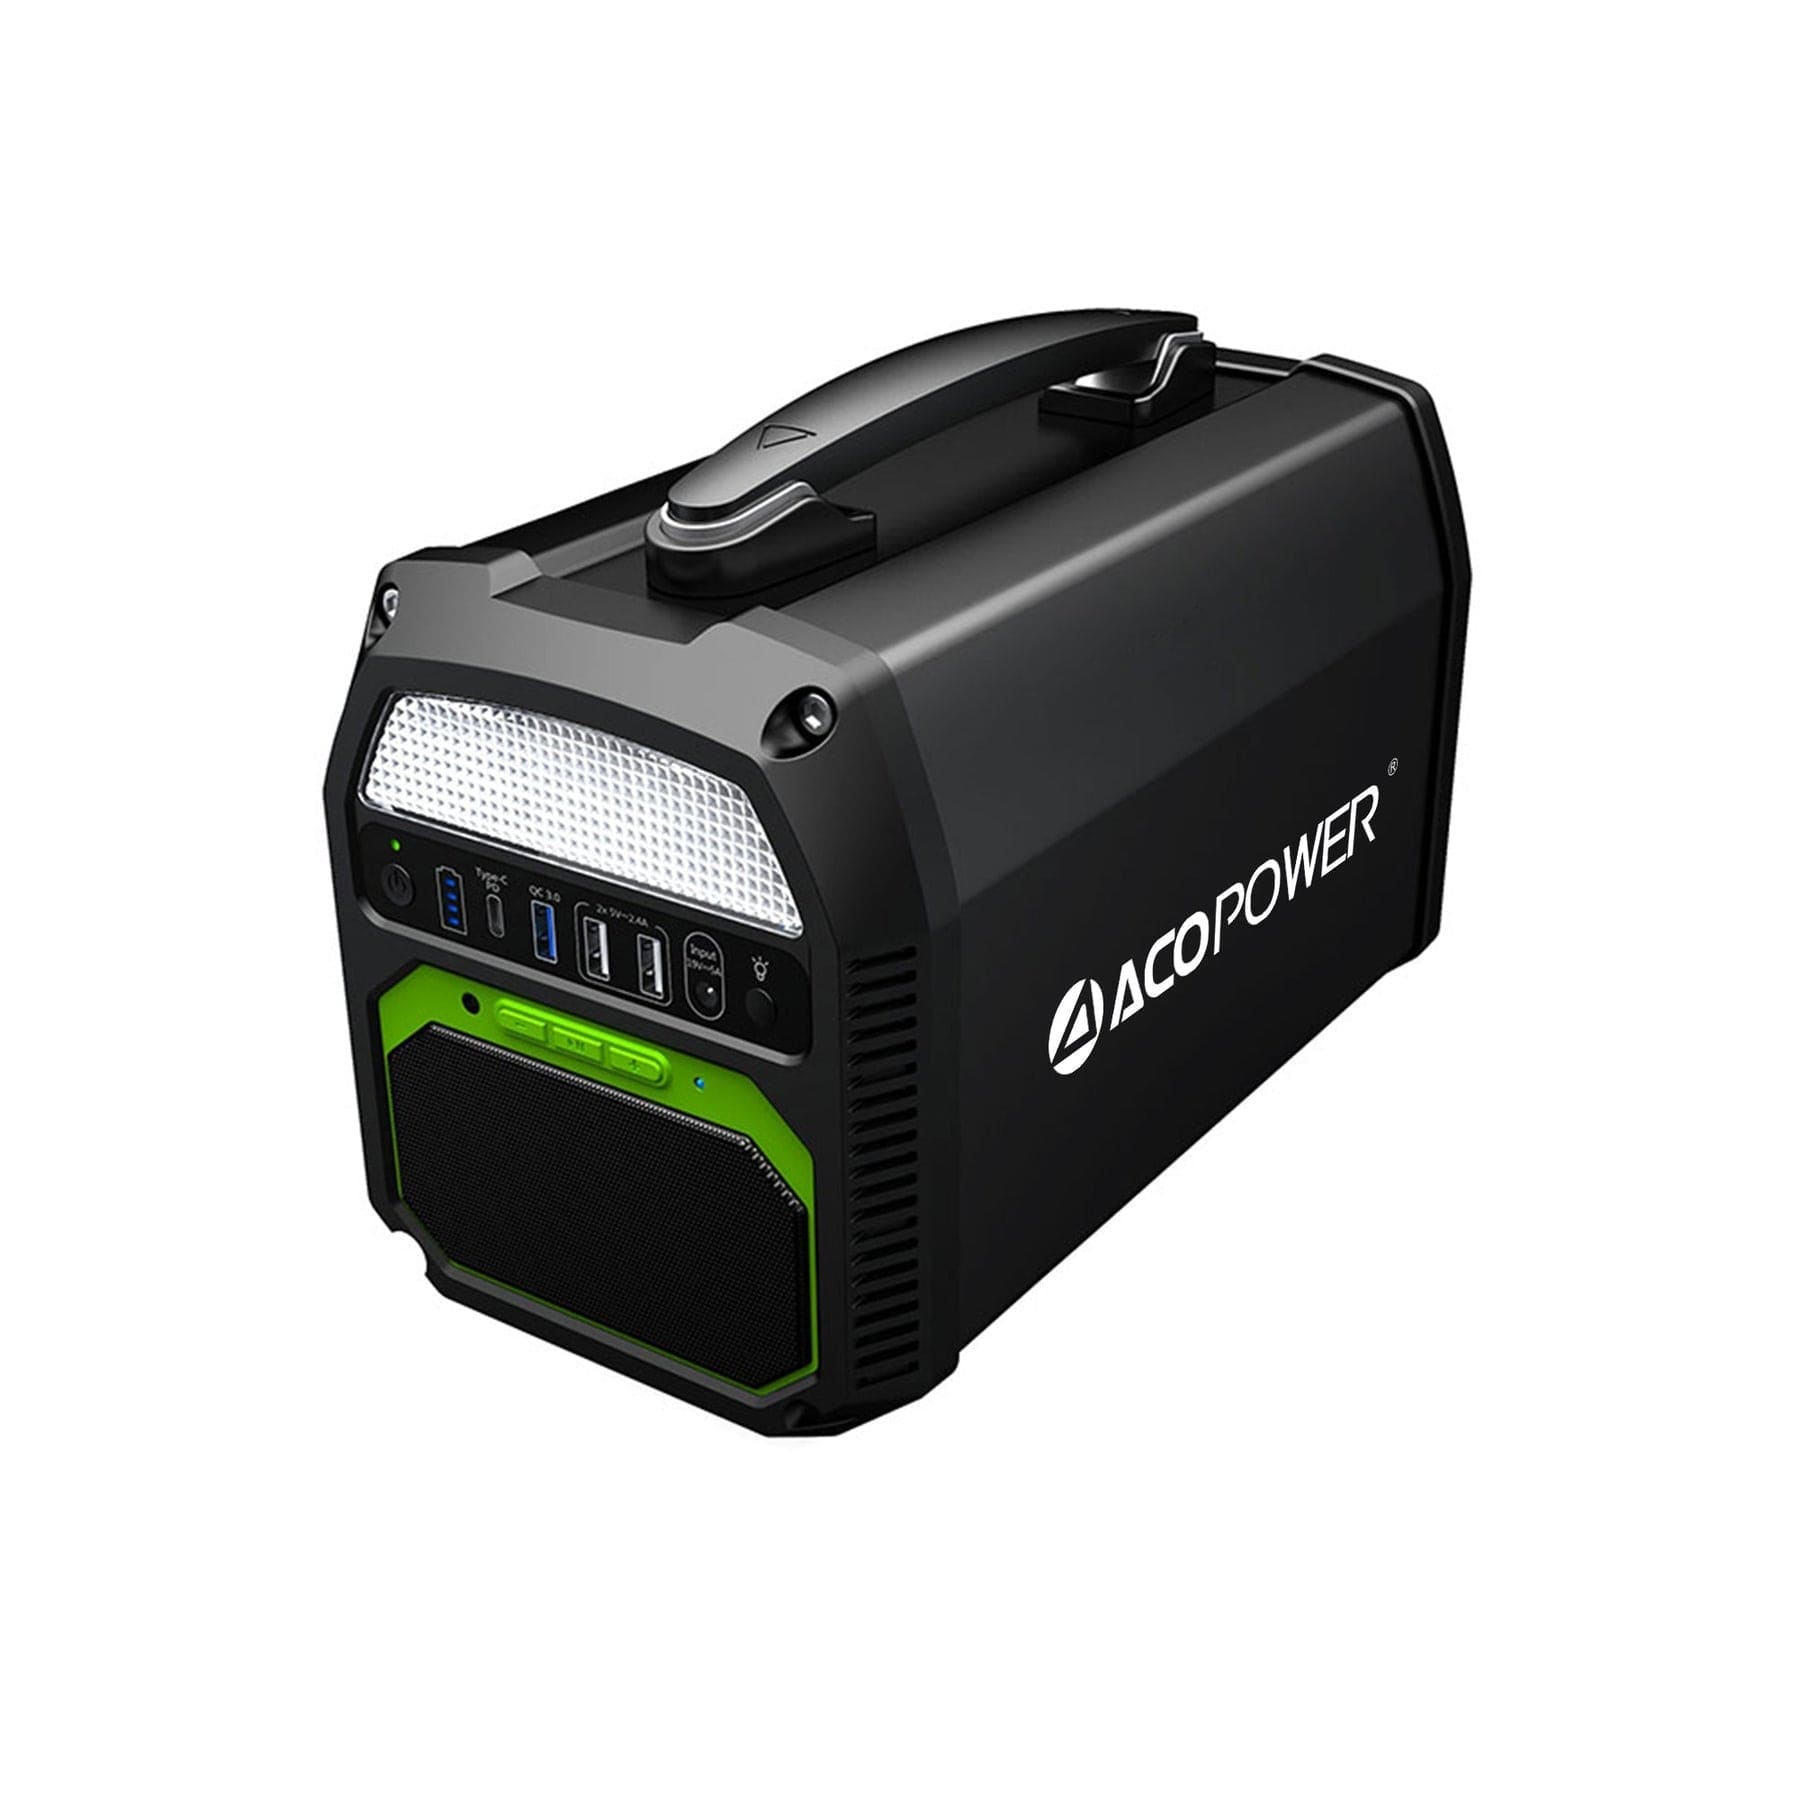 ACOPOWER PS500 462Wh/500W Portable Power Station HY-SG-PS500